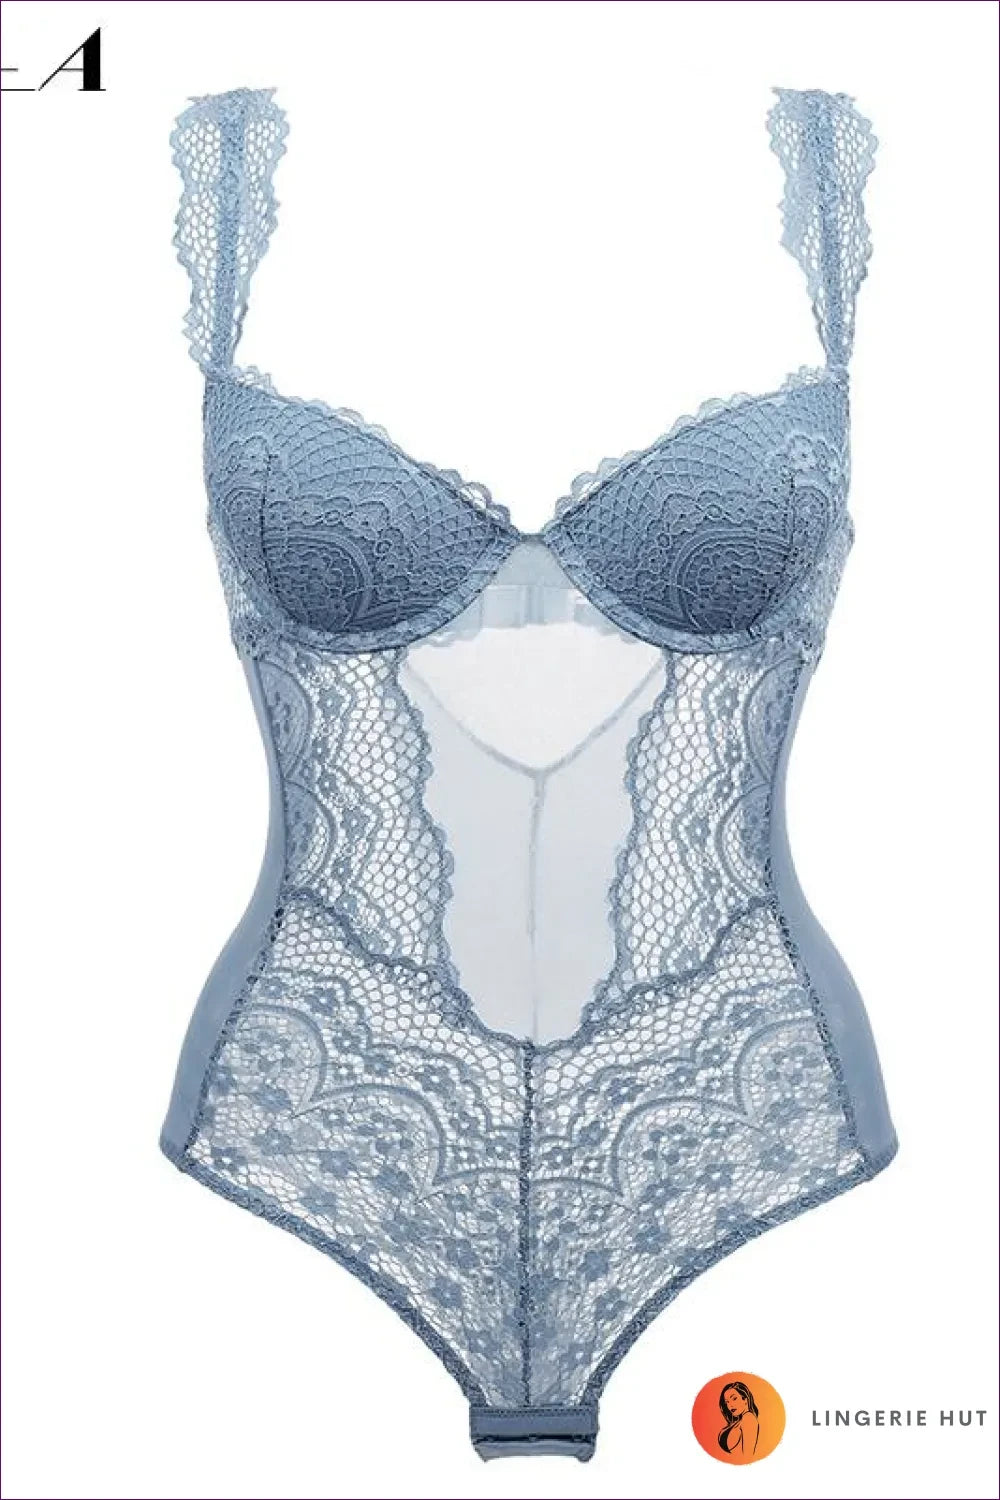 Elevate Your Style With Our Underwire Lace Sheer Bodysuit. Seductive And Sophisticated, Perfect For